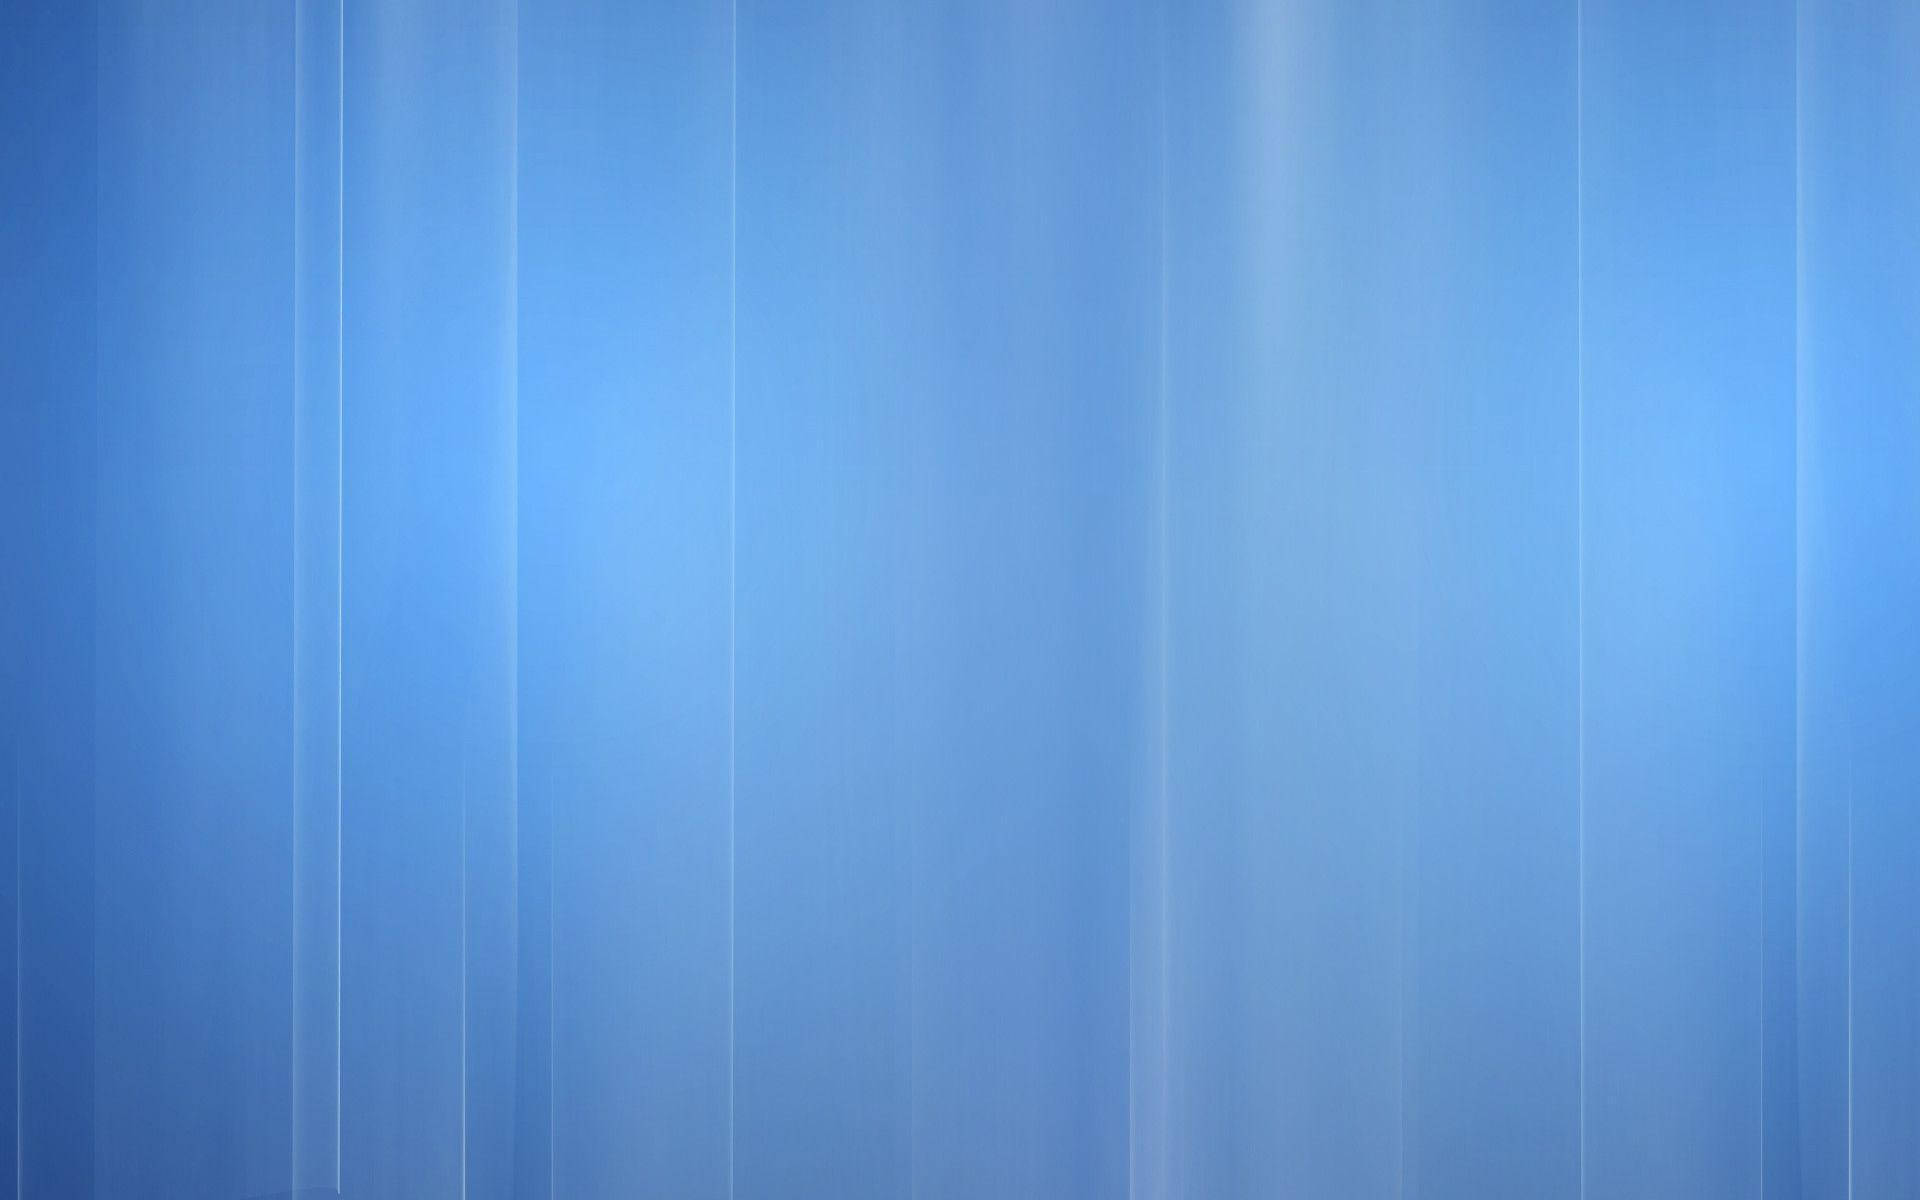 A vibrant abstract glitch pattern on a soft blue background. Wallpaper